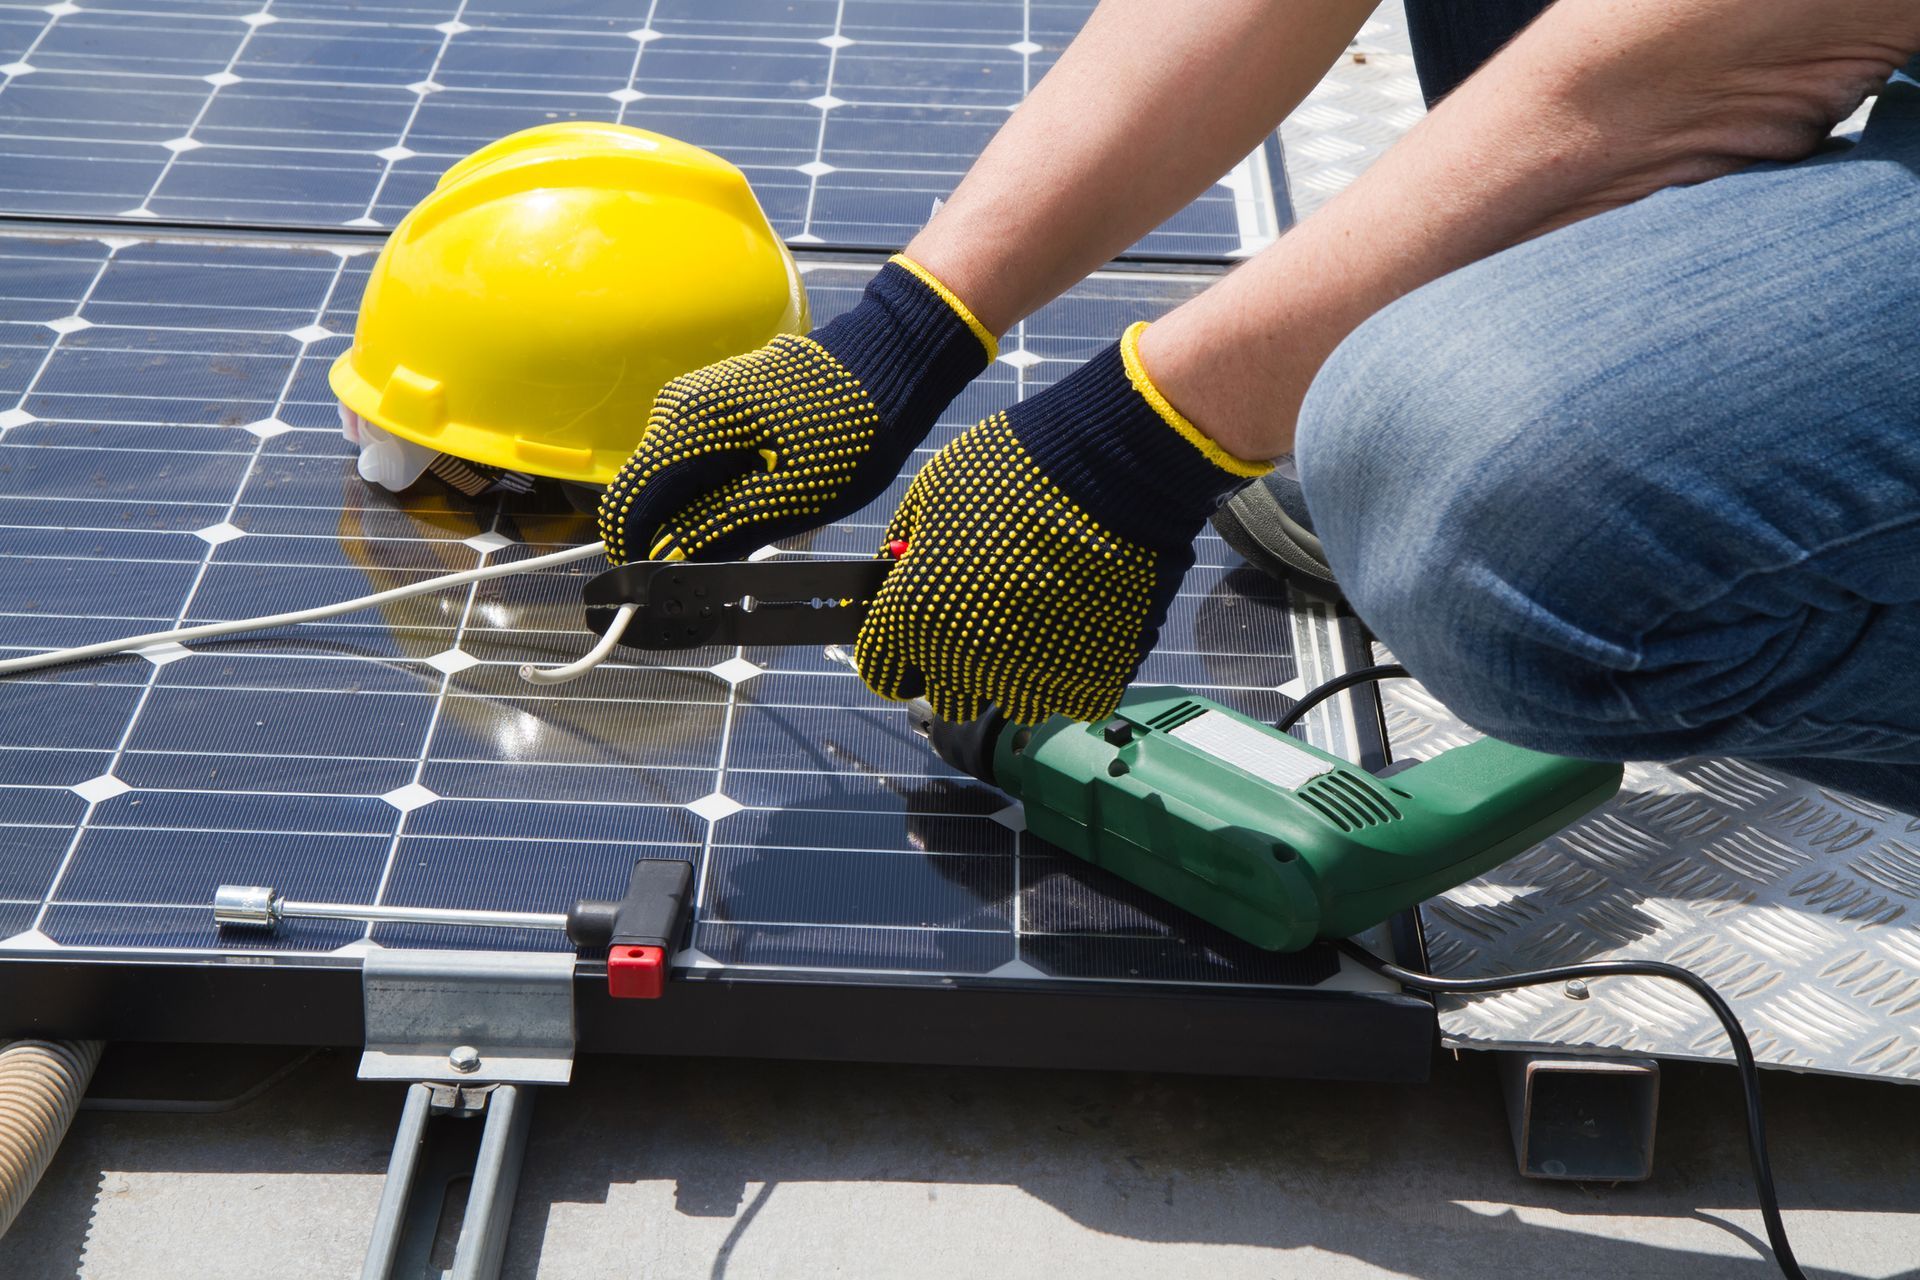 A person wearing gloves is working on a solar panel